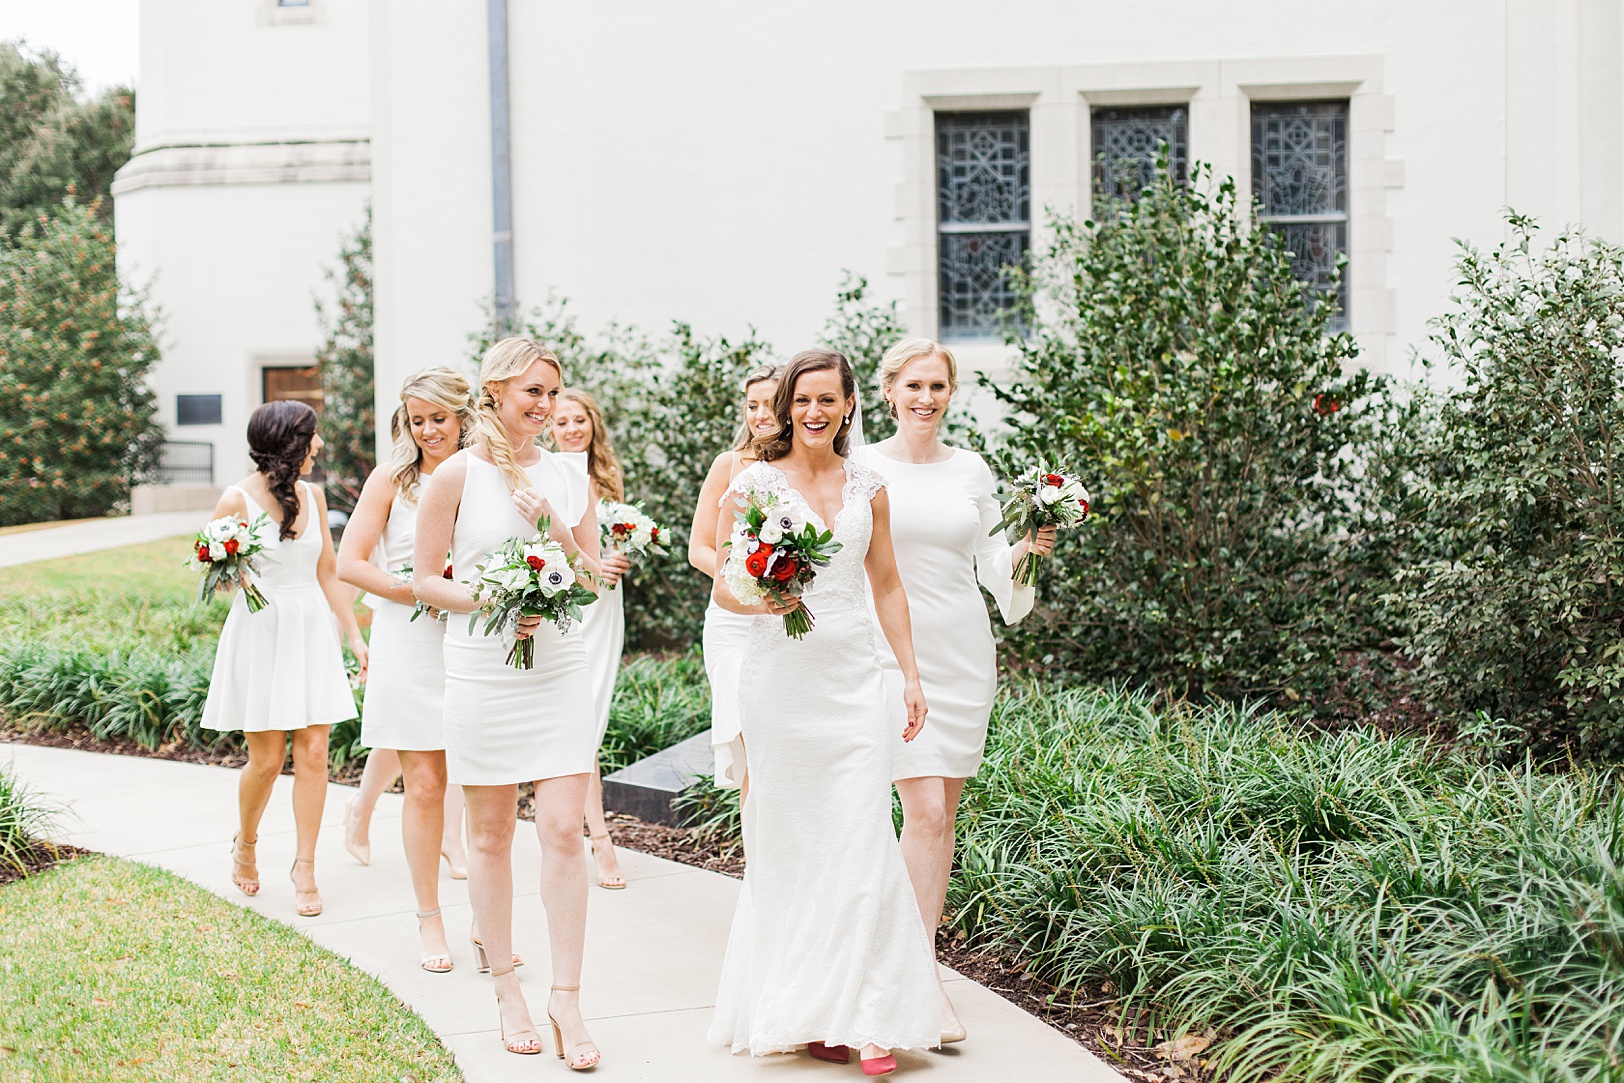 Charleston Winter Bride with Bridesmaids in white bridesmaids dresses | Kaitlin Scott Photography